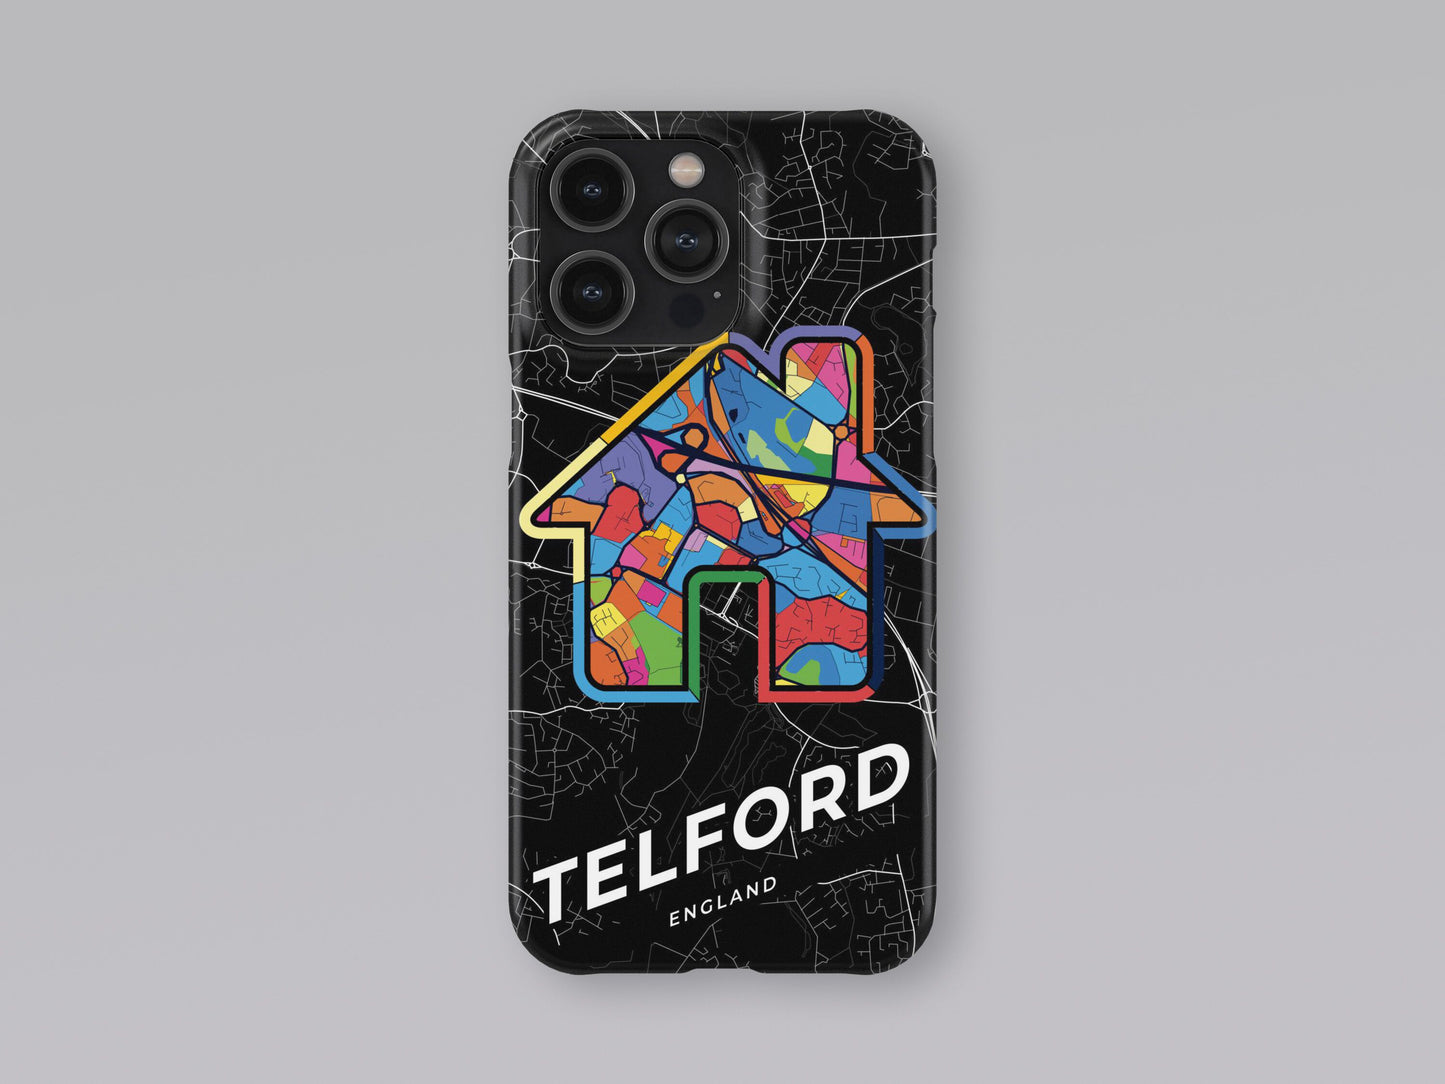 Telford England slim phone case with colorful icon 3